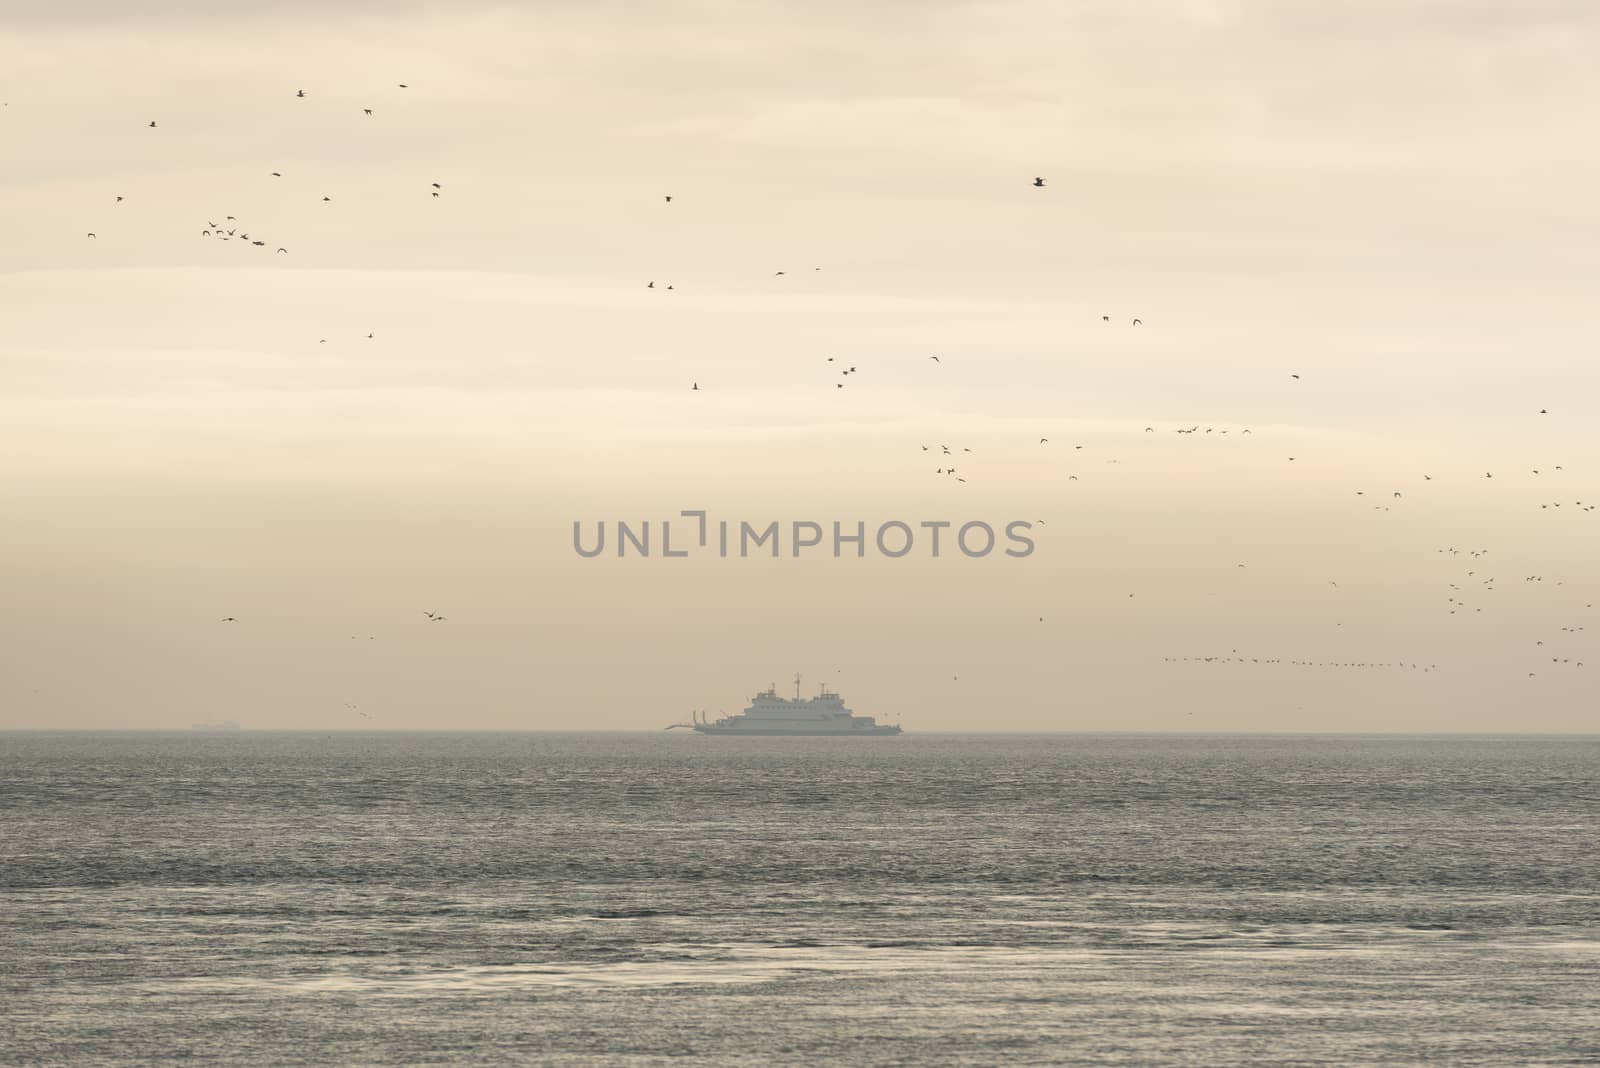 Old ferry on the Wadden Sea surrounded by birds
 by Tofotografie